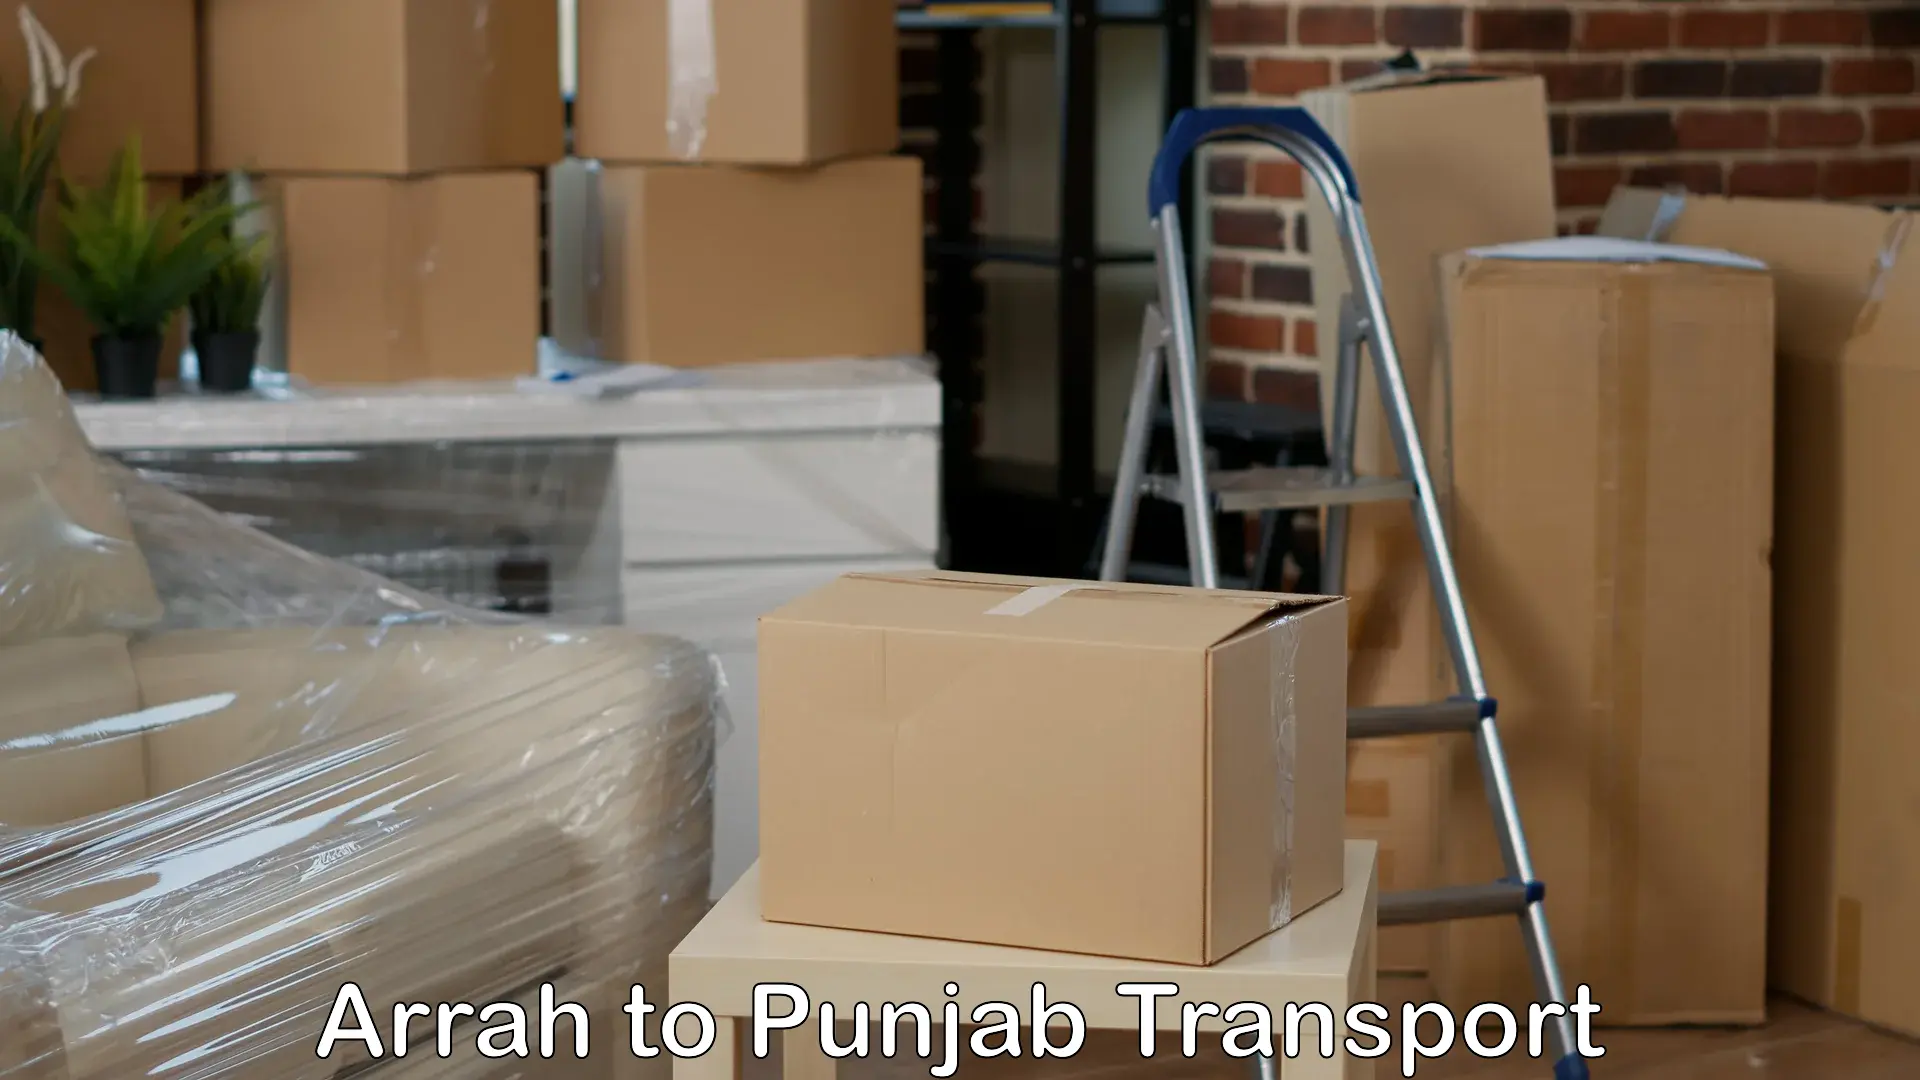 Delivery service Arrah to Mohali